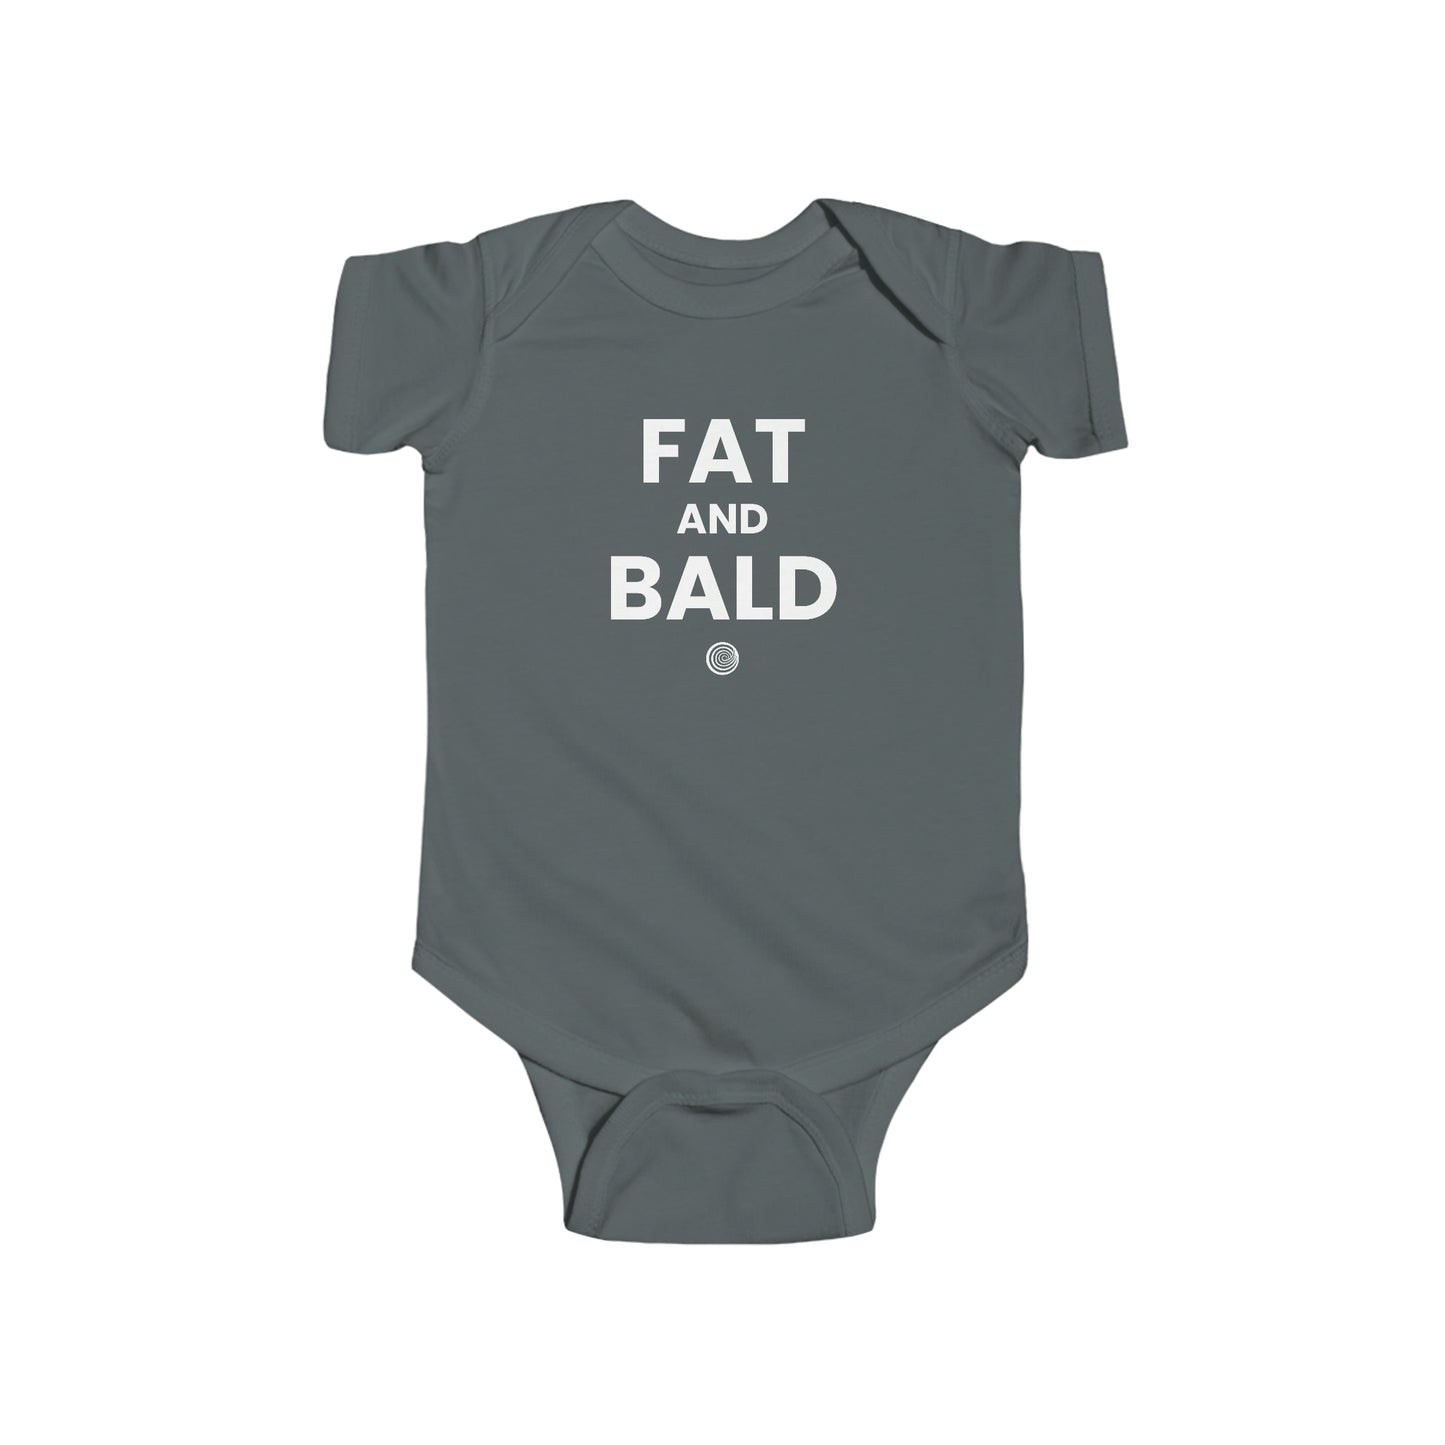 "Fat And Bald" Onesie